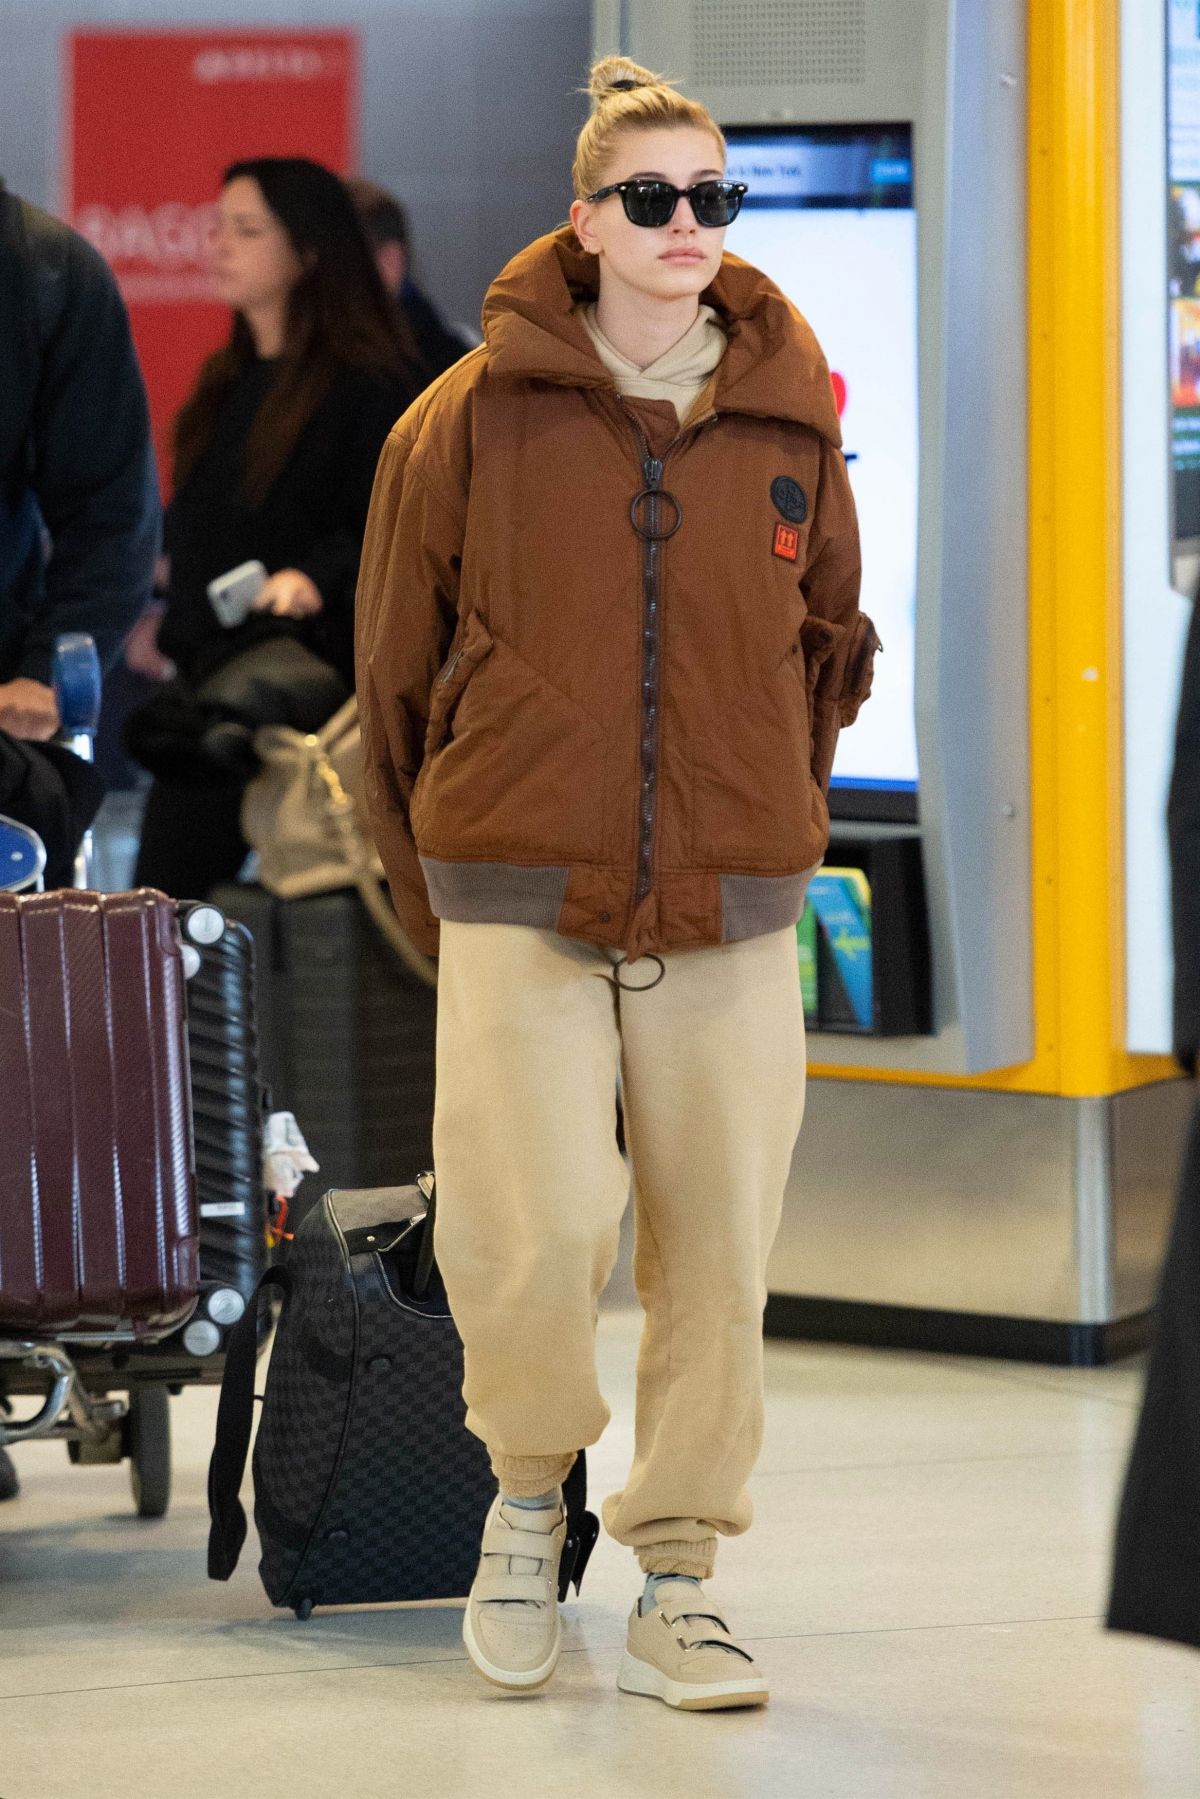 HAILEY BIEBER at JFK Airport in New York 03/04/2019 - HawtCelebs